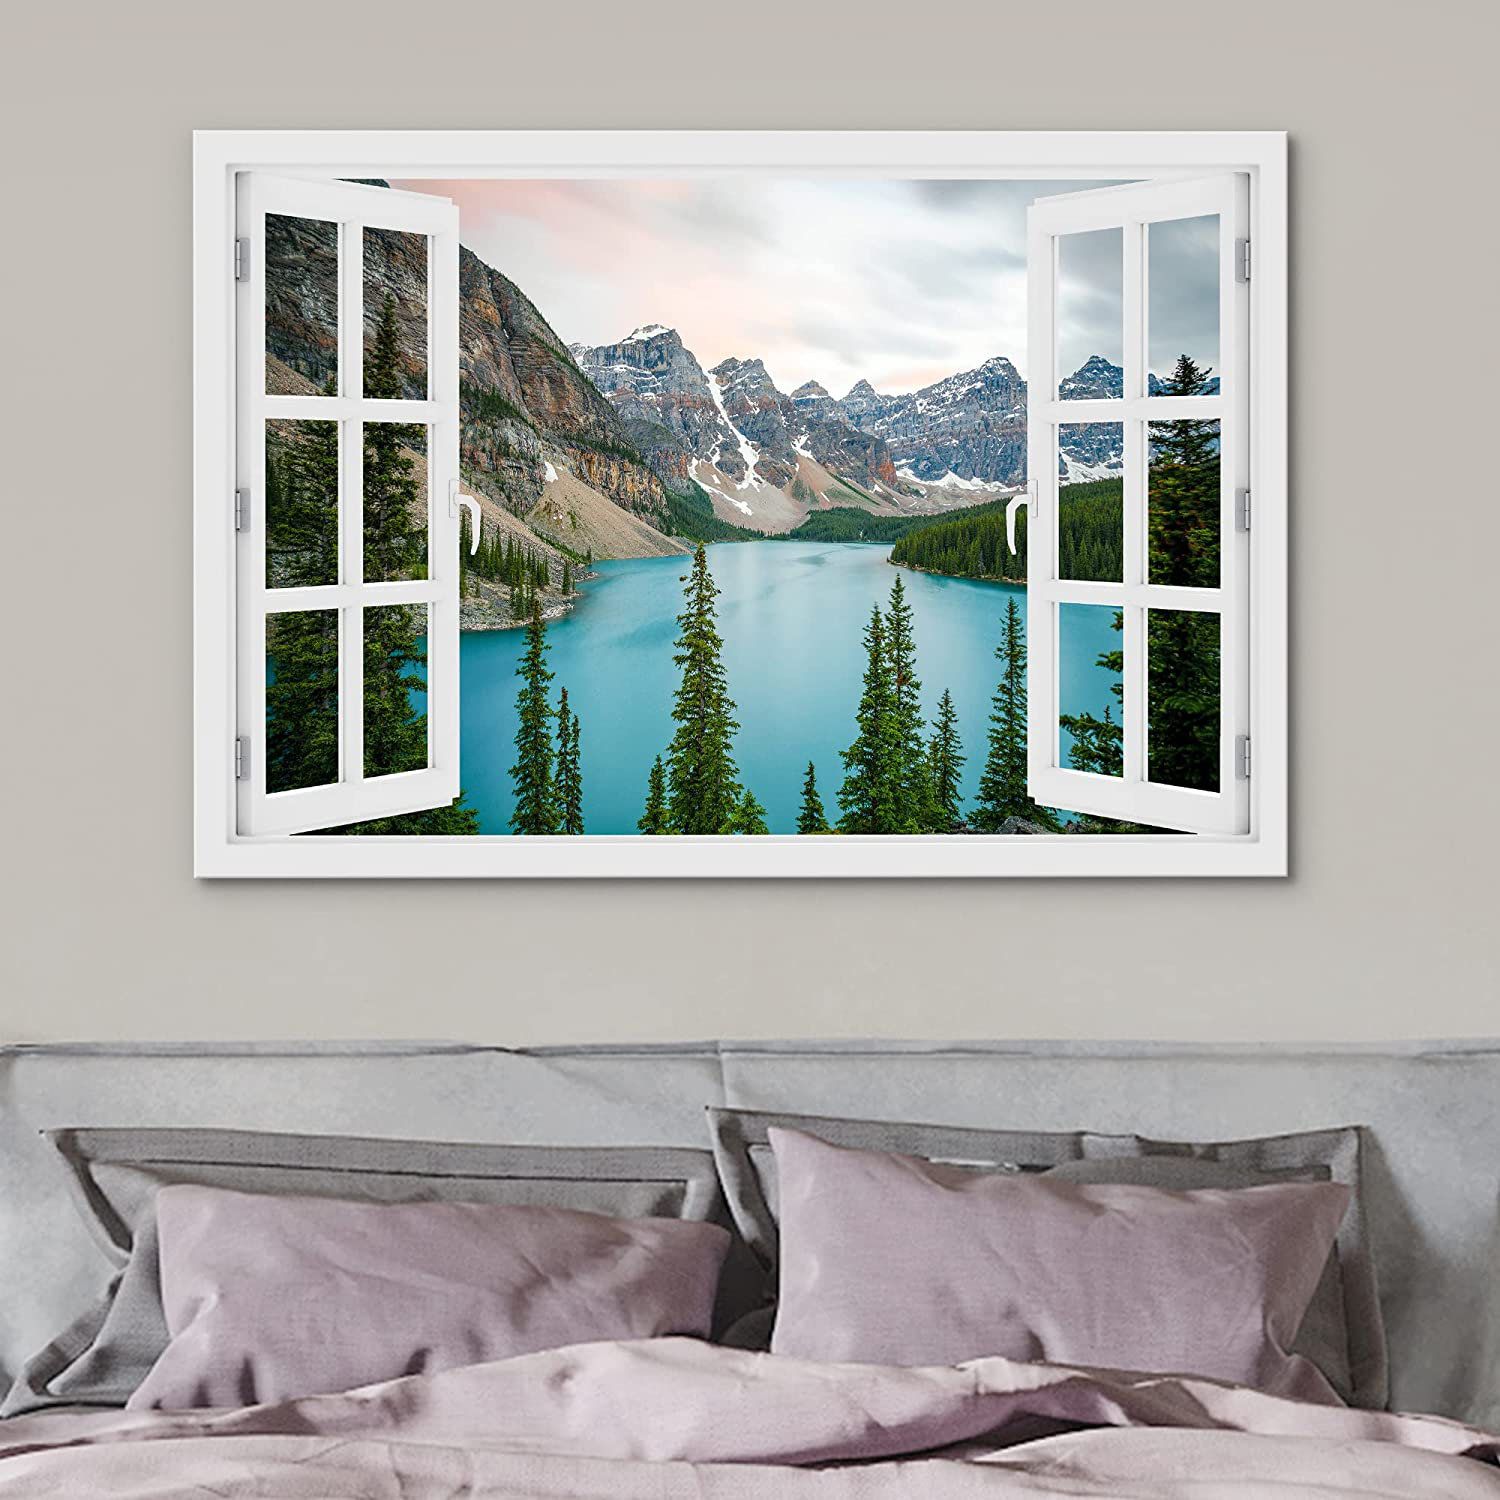 Idea4Wall Scenic Spring Mountain Lake – Unframed Graphic Art On Canvas |  Wayfair Intended For Mountain Lake Wall Art (View 14 of 15)